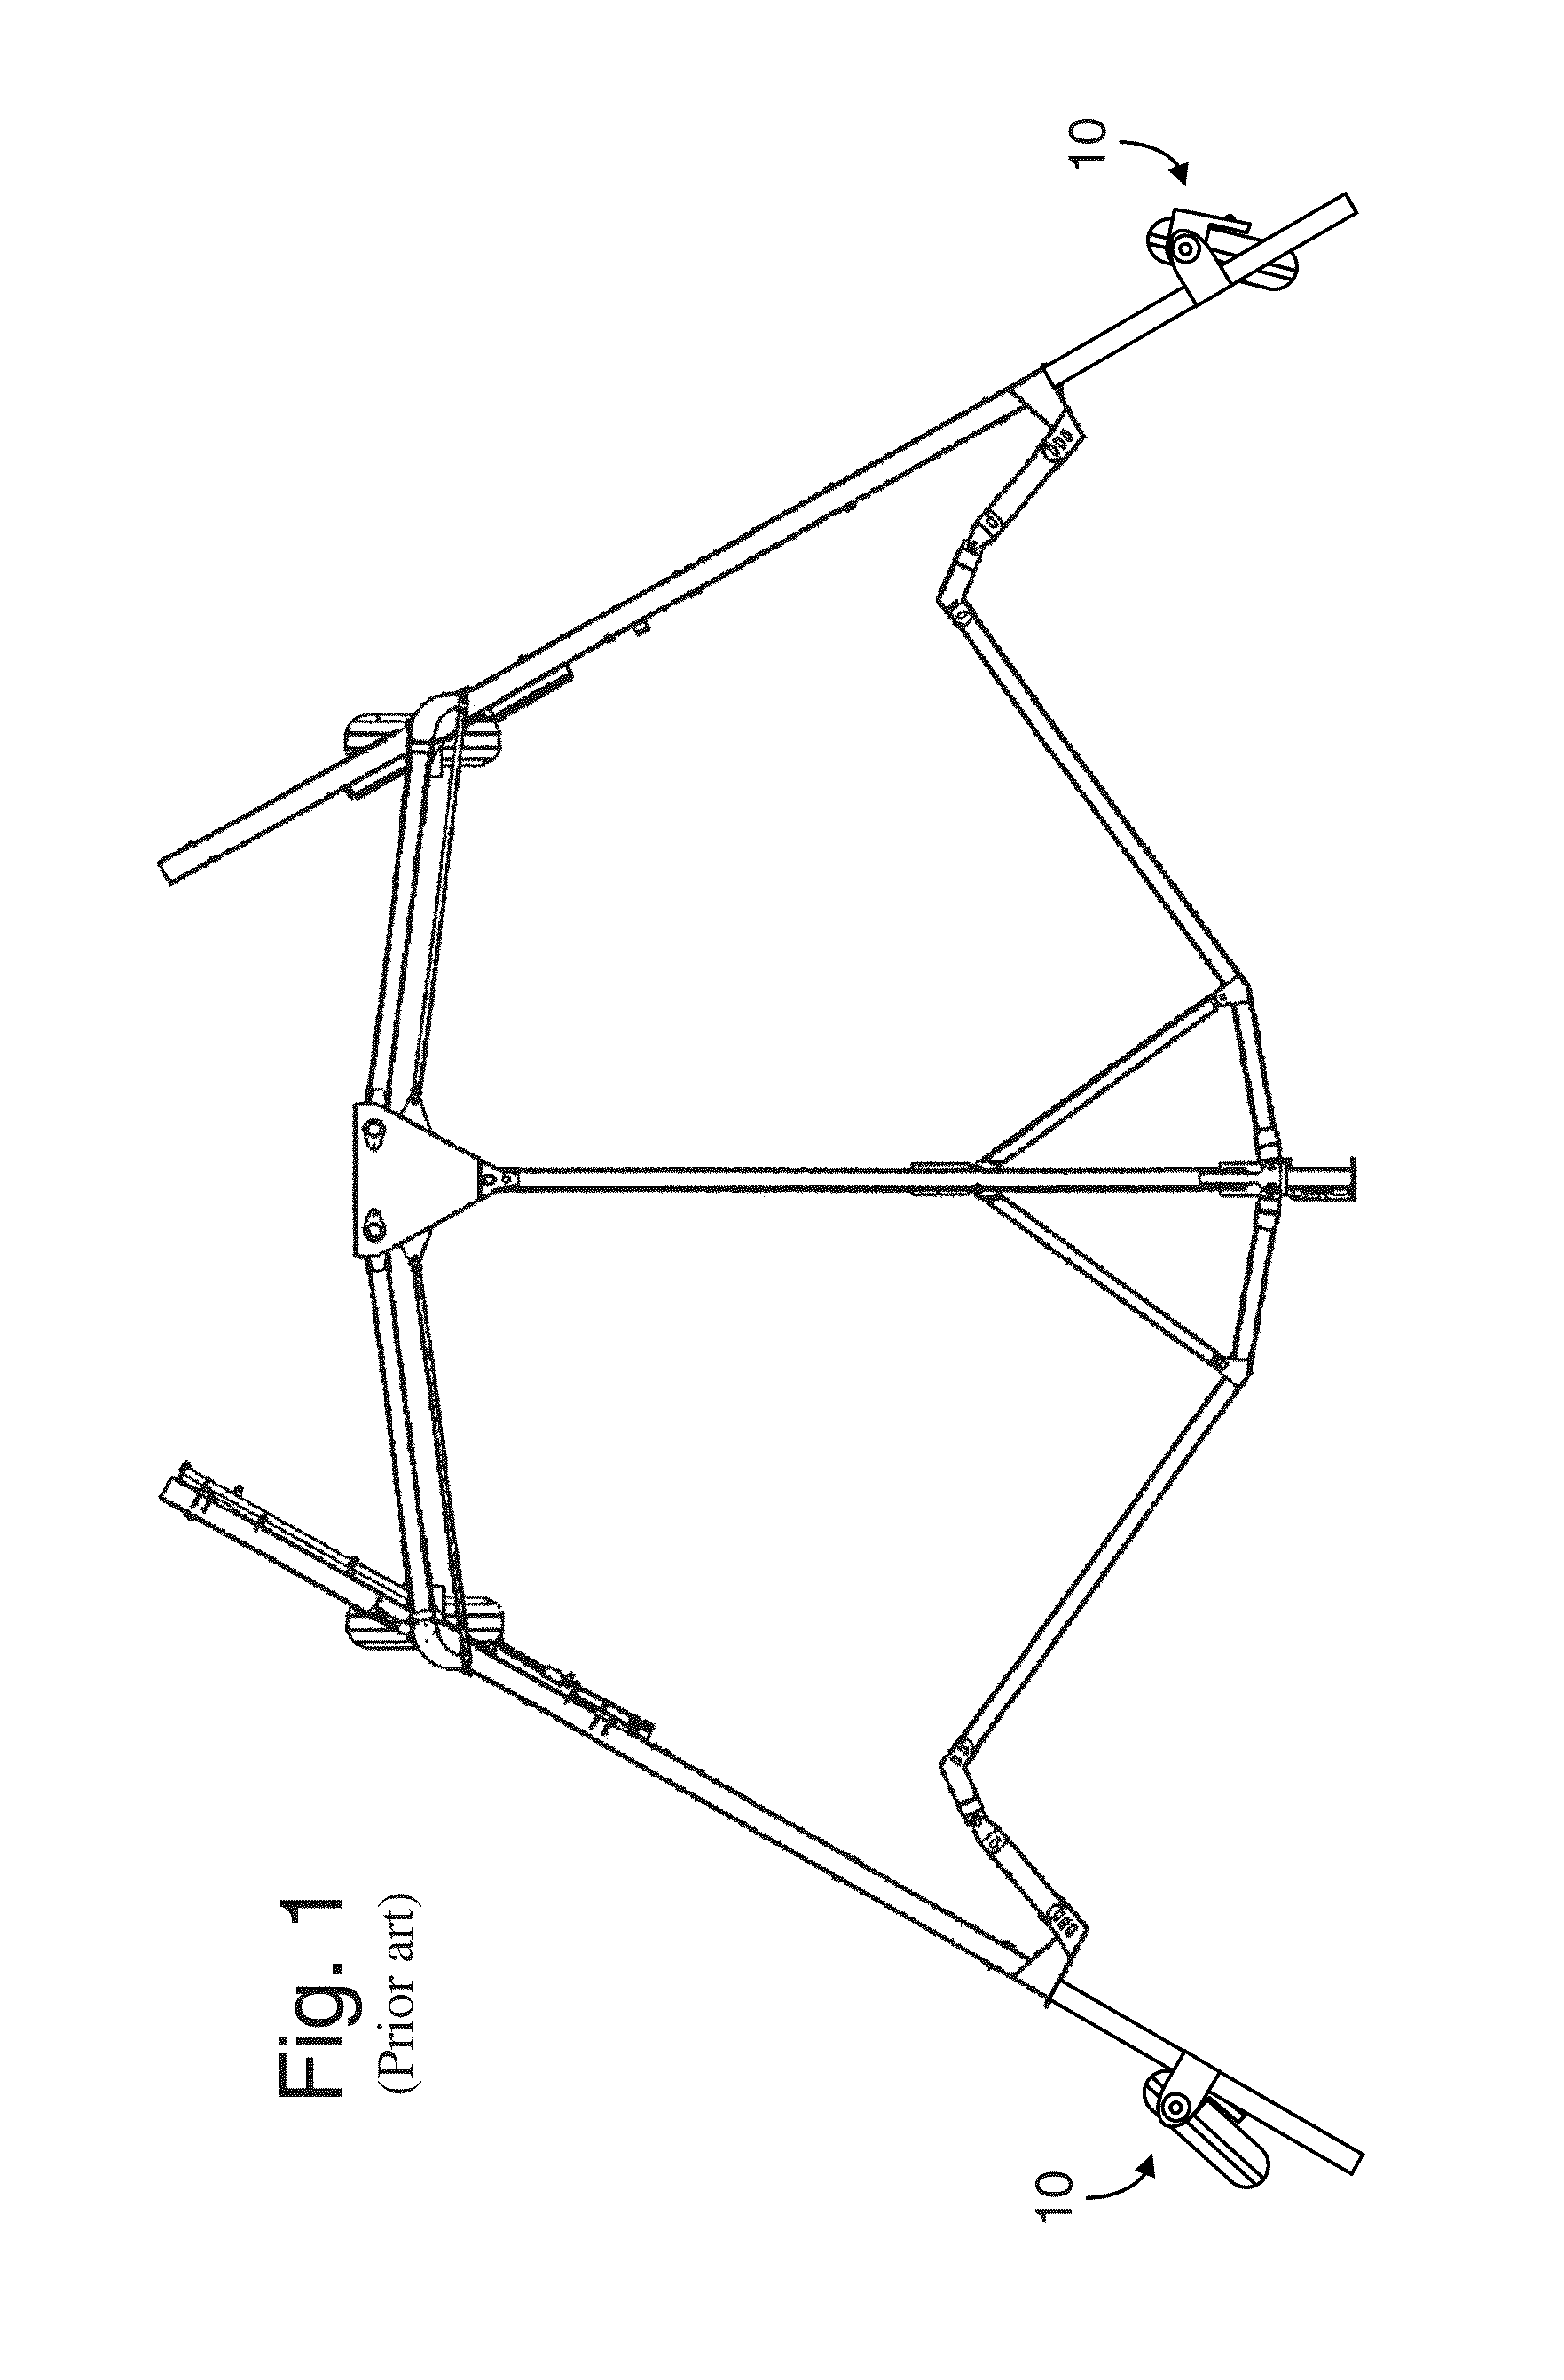 Folding frame for an agricultural implement